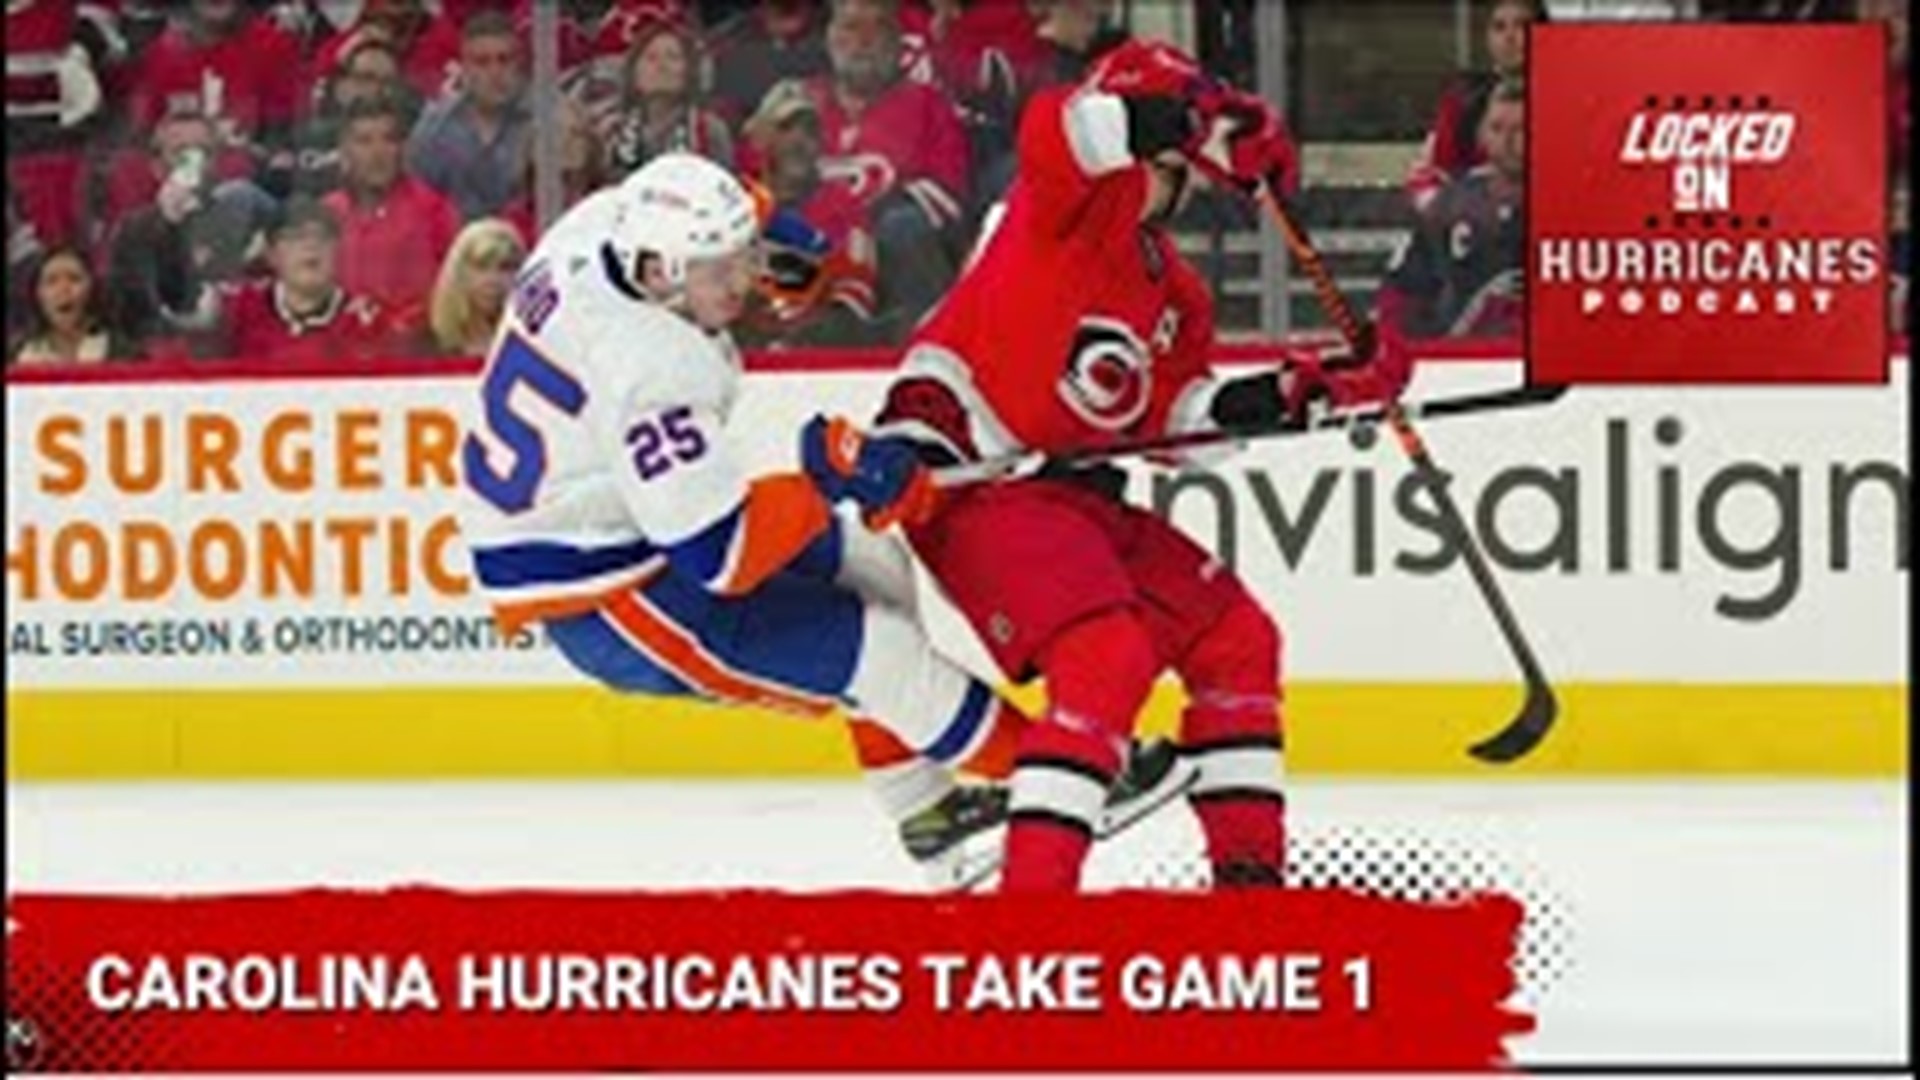 The powerplay played an integral part in the win, despite its regular season struggles.  That and more on Locked On Hurricanes.